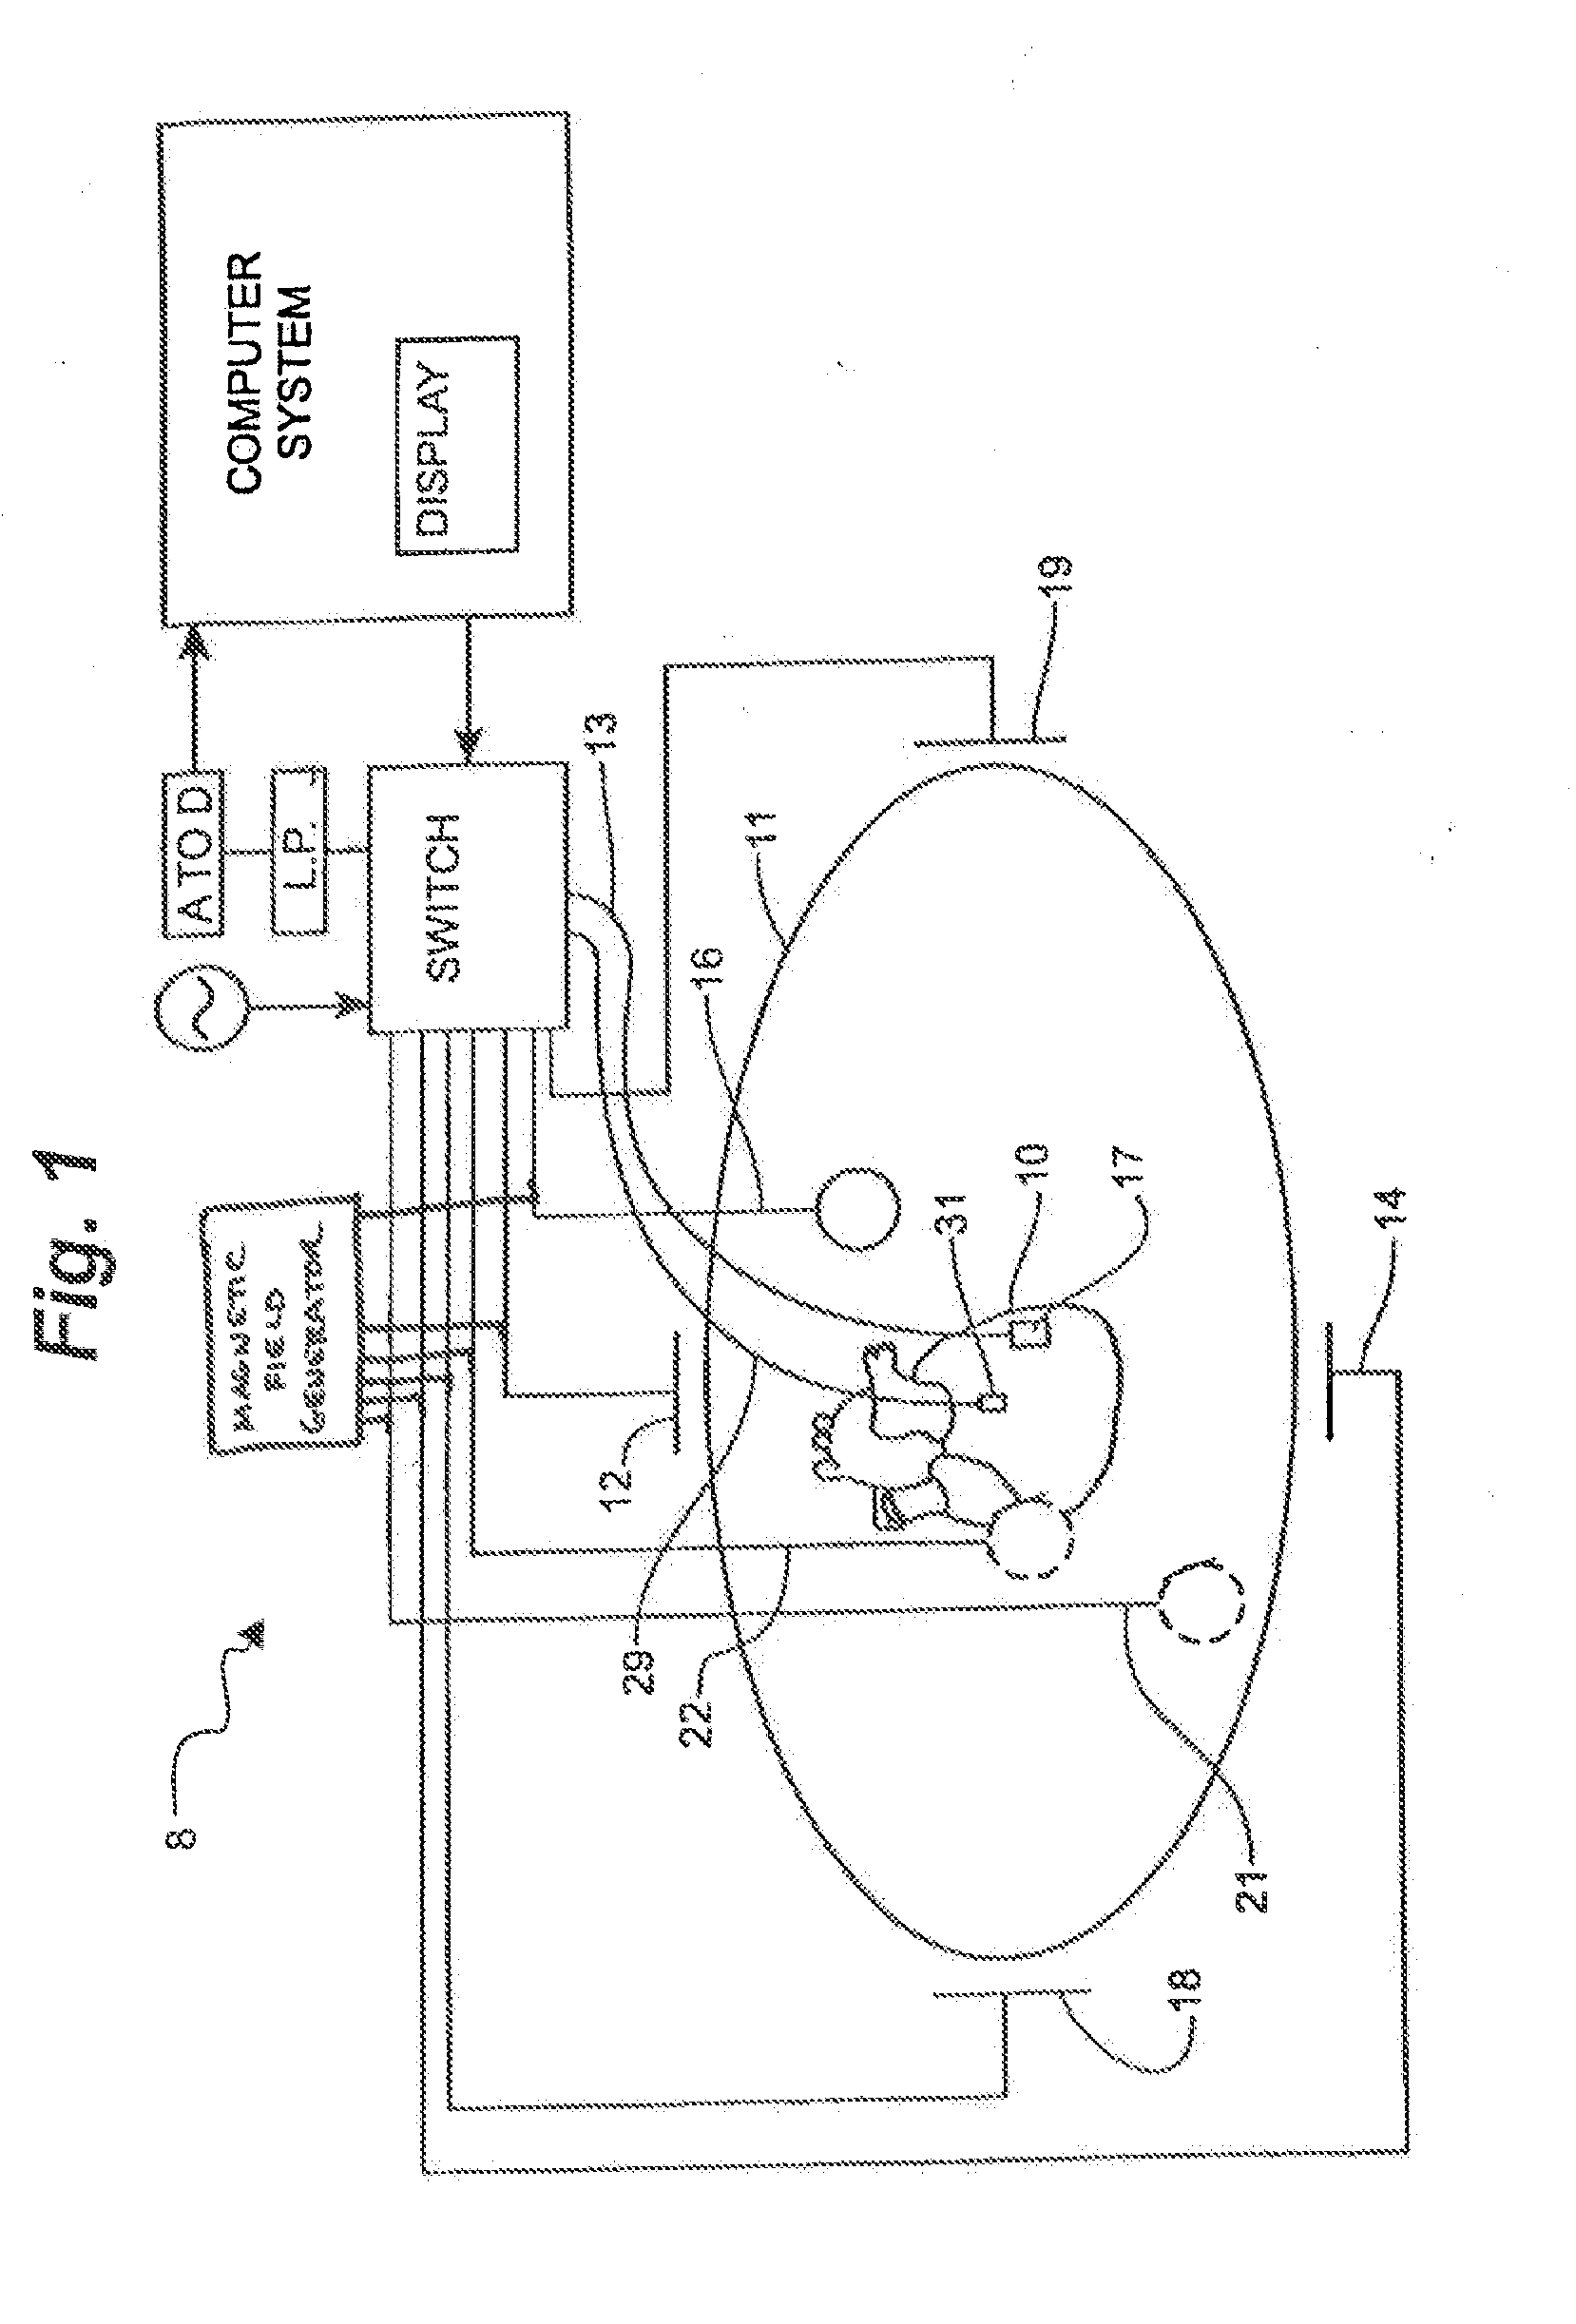 System and Method for Registration of Multiple Navigation Systems to a Common Coordinate Frame